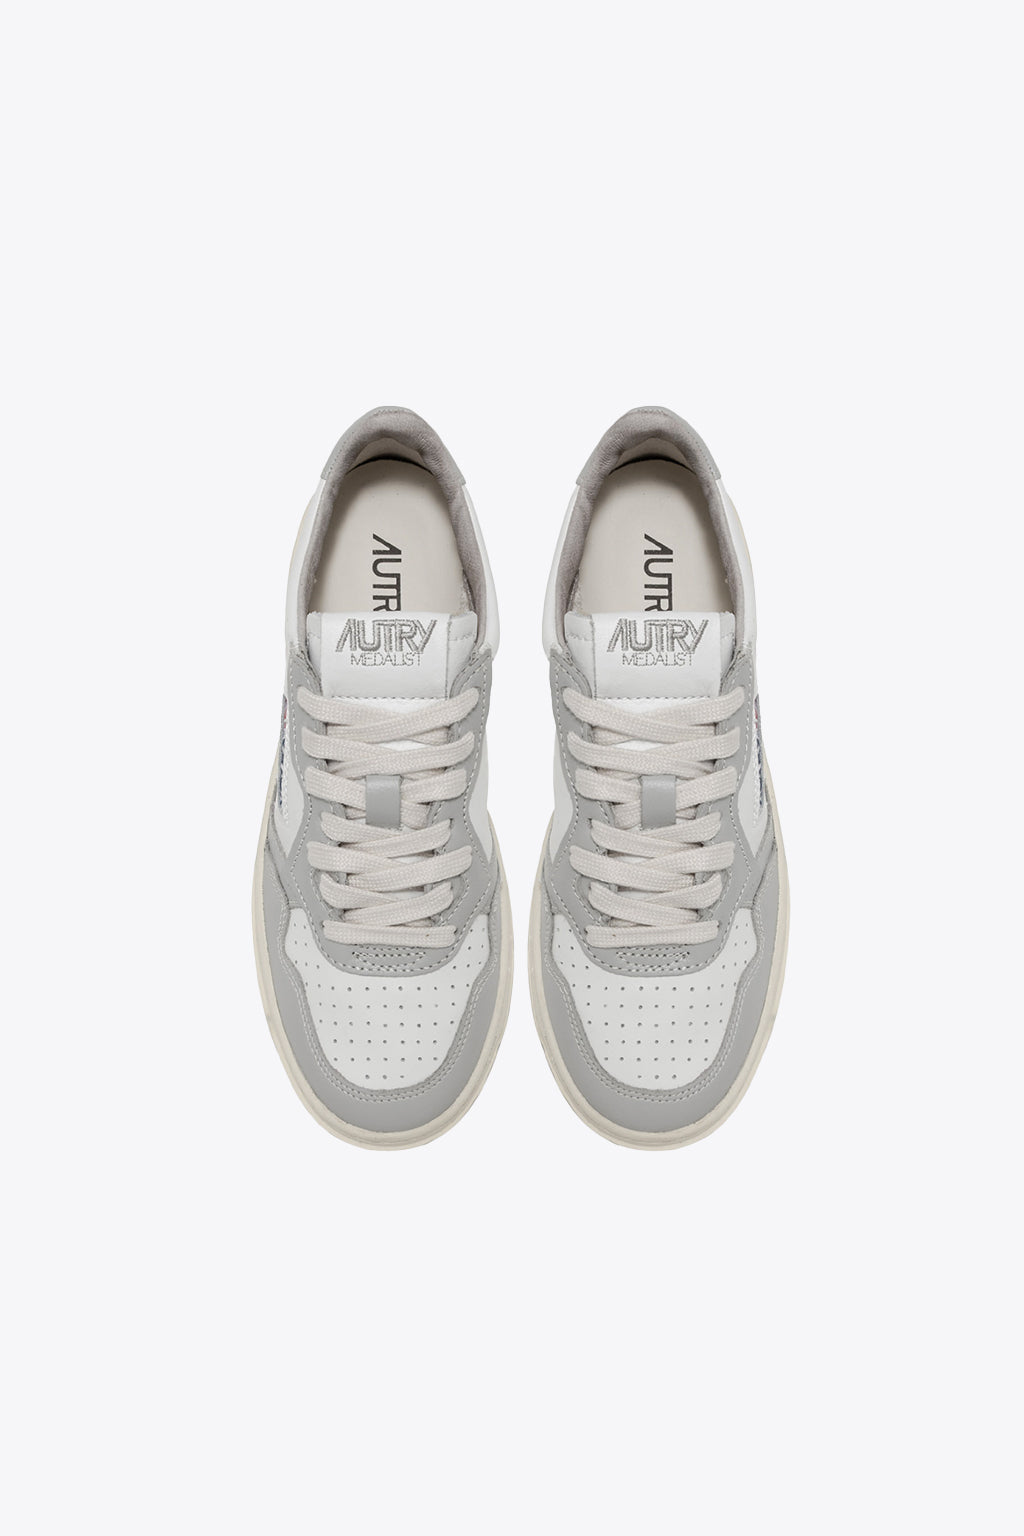 alt-image__Grey-and-white-leather-low-sneaker---Medalist